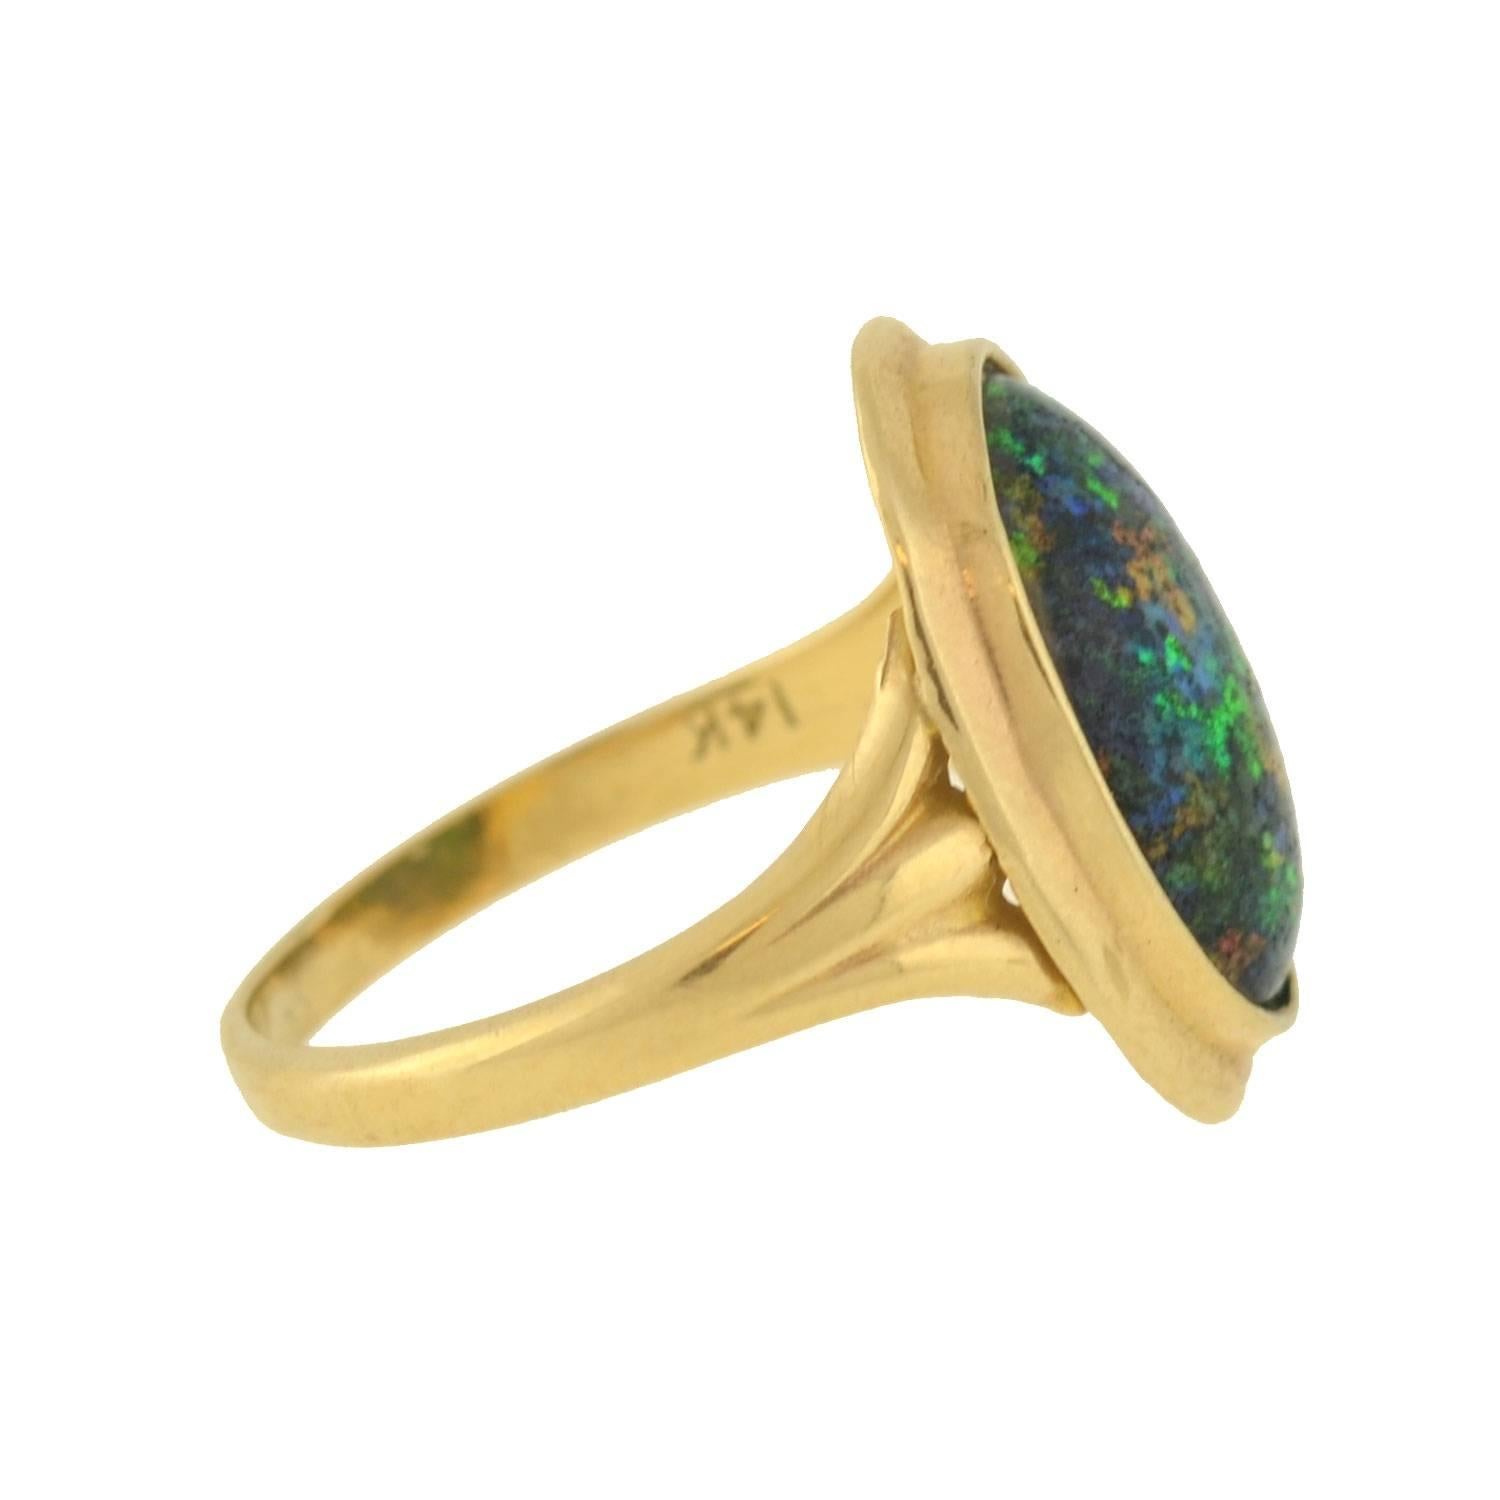 Black opals are among the most rare and valuable of all natural opal varieties. Unlike their common opal counterparts, they have a dark canvas and radiate brilliant flashes of colors due to their subtle iron oxide and carbon properties. Although a